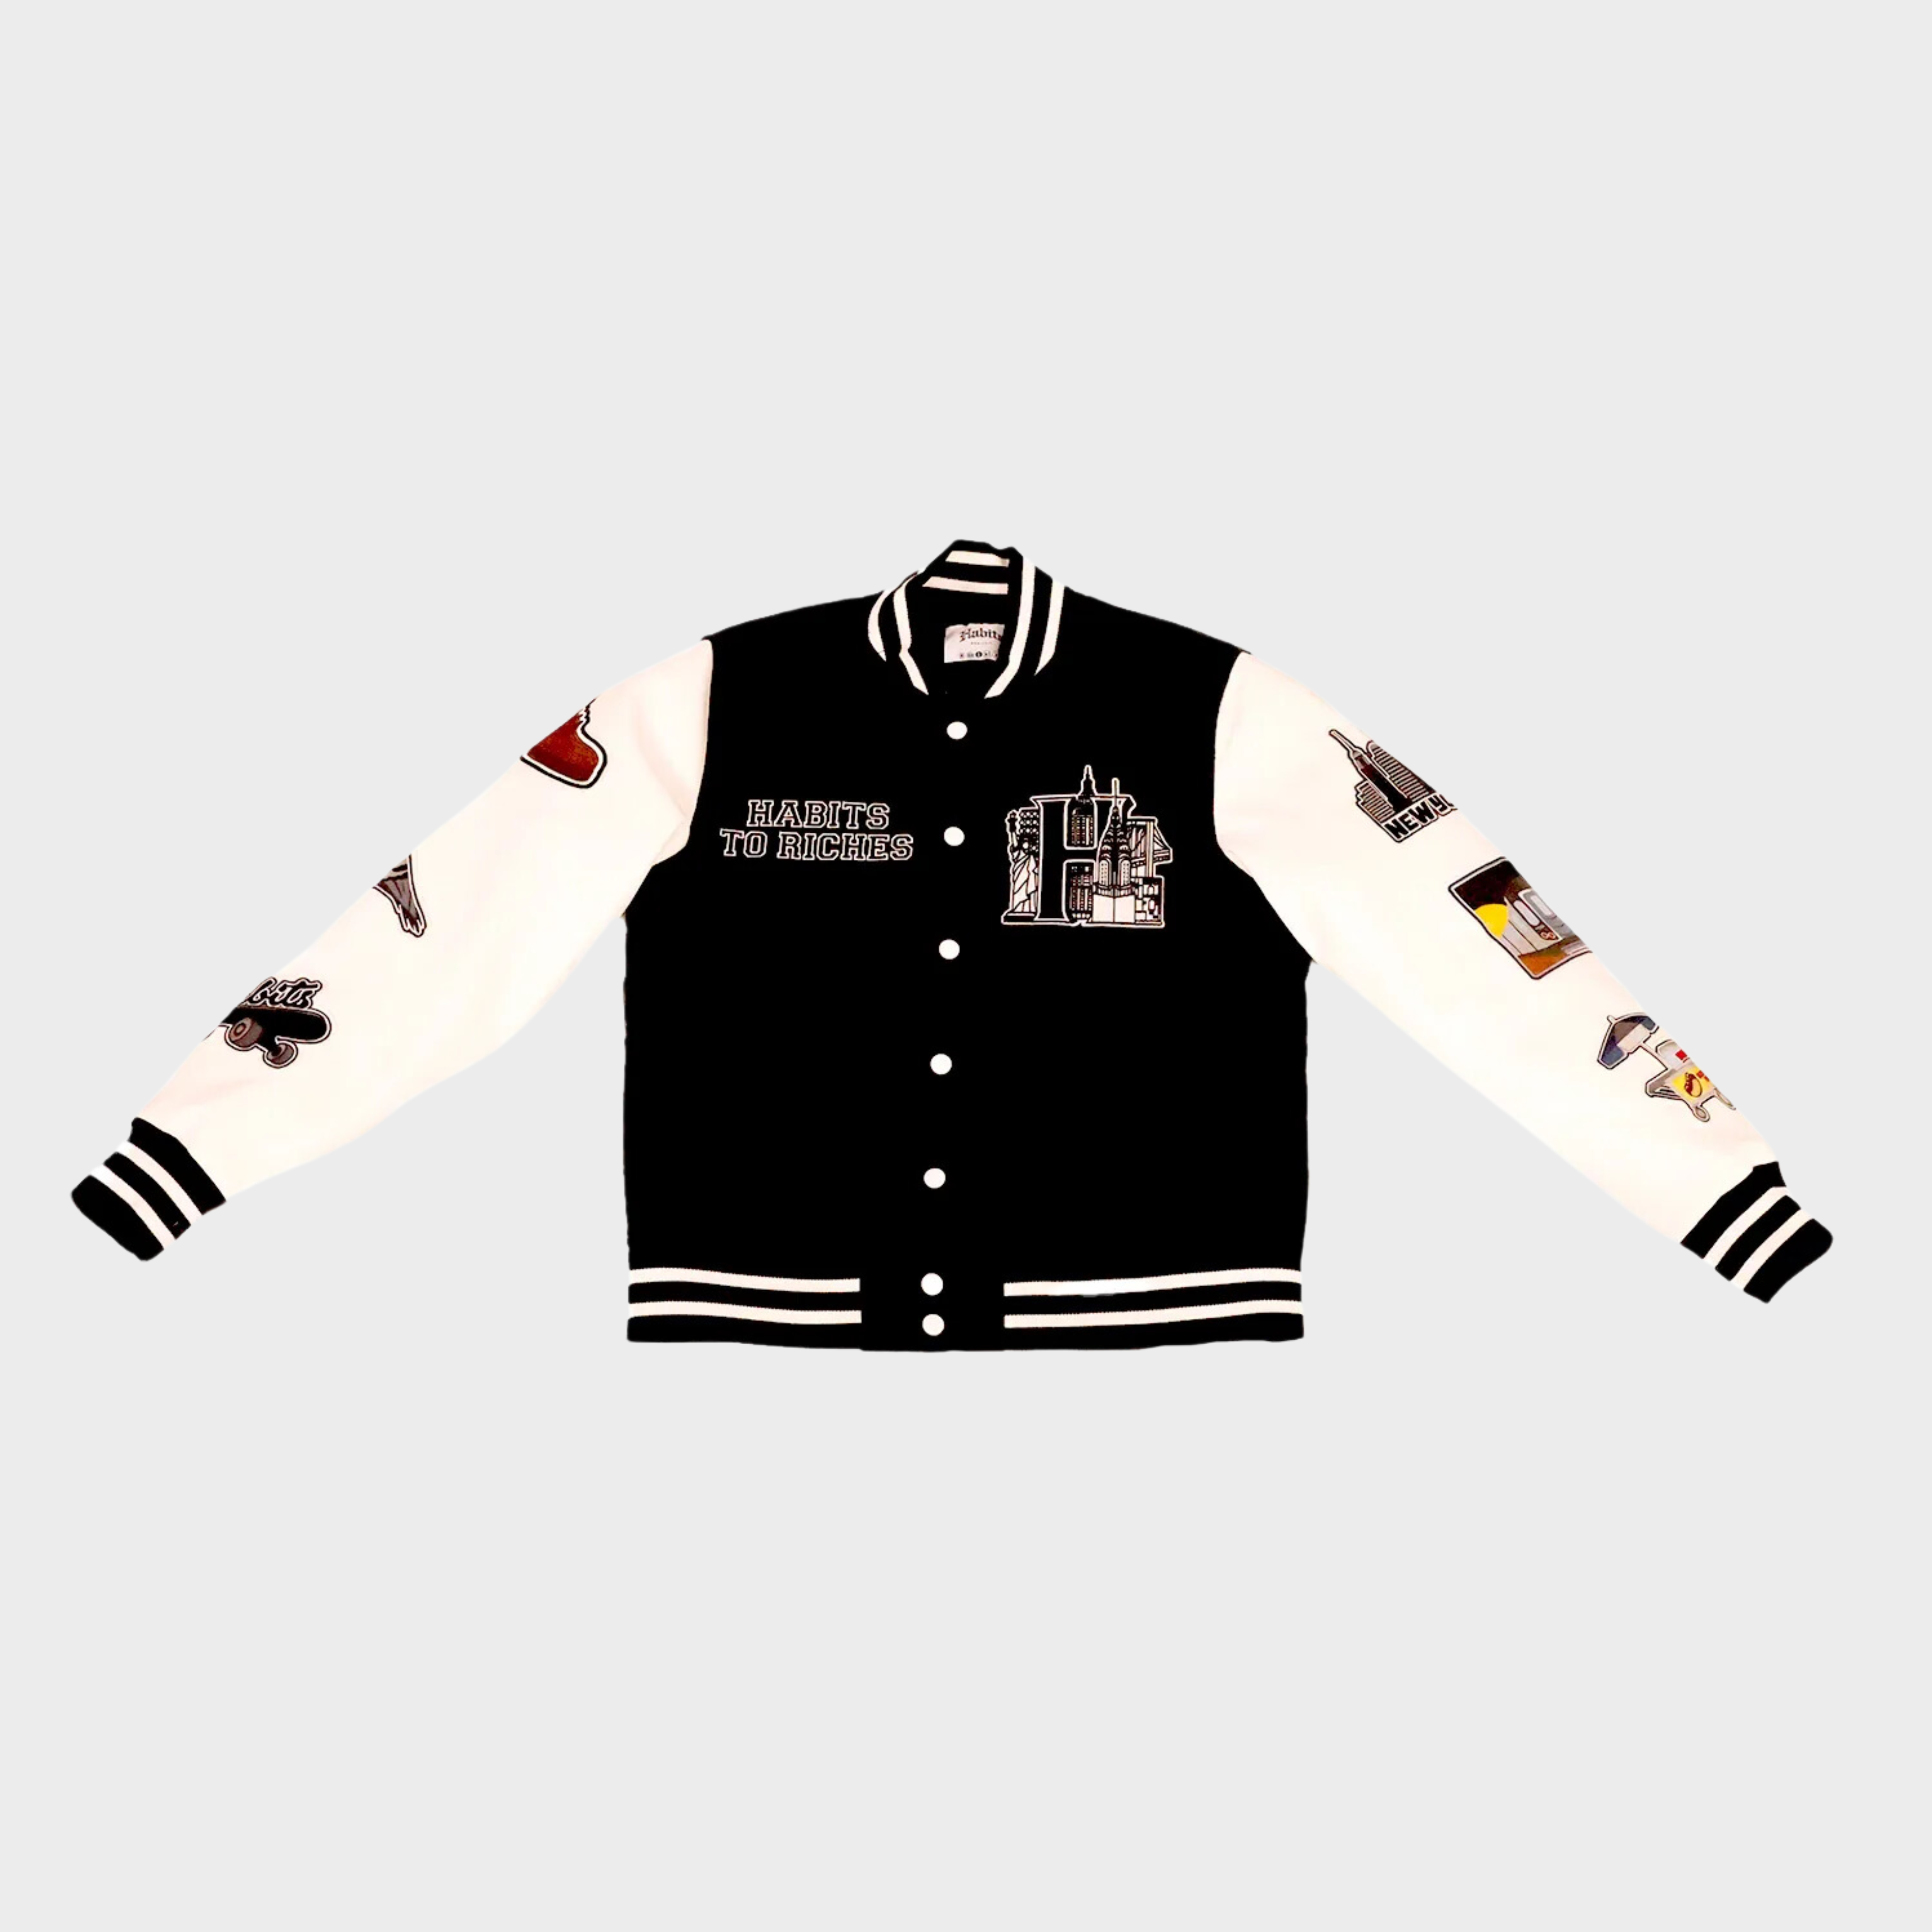 EXCLUSIVE: Black Habits To Riches Varsity Jacket